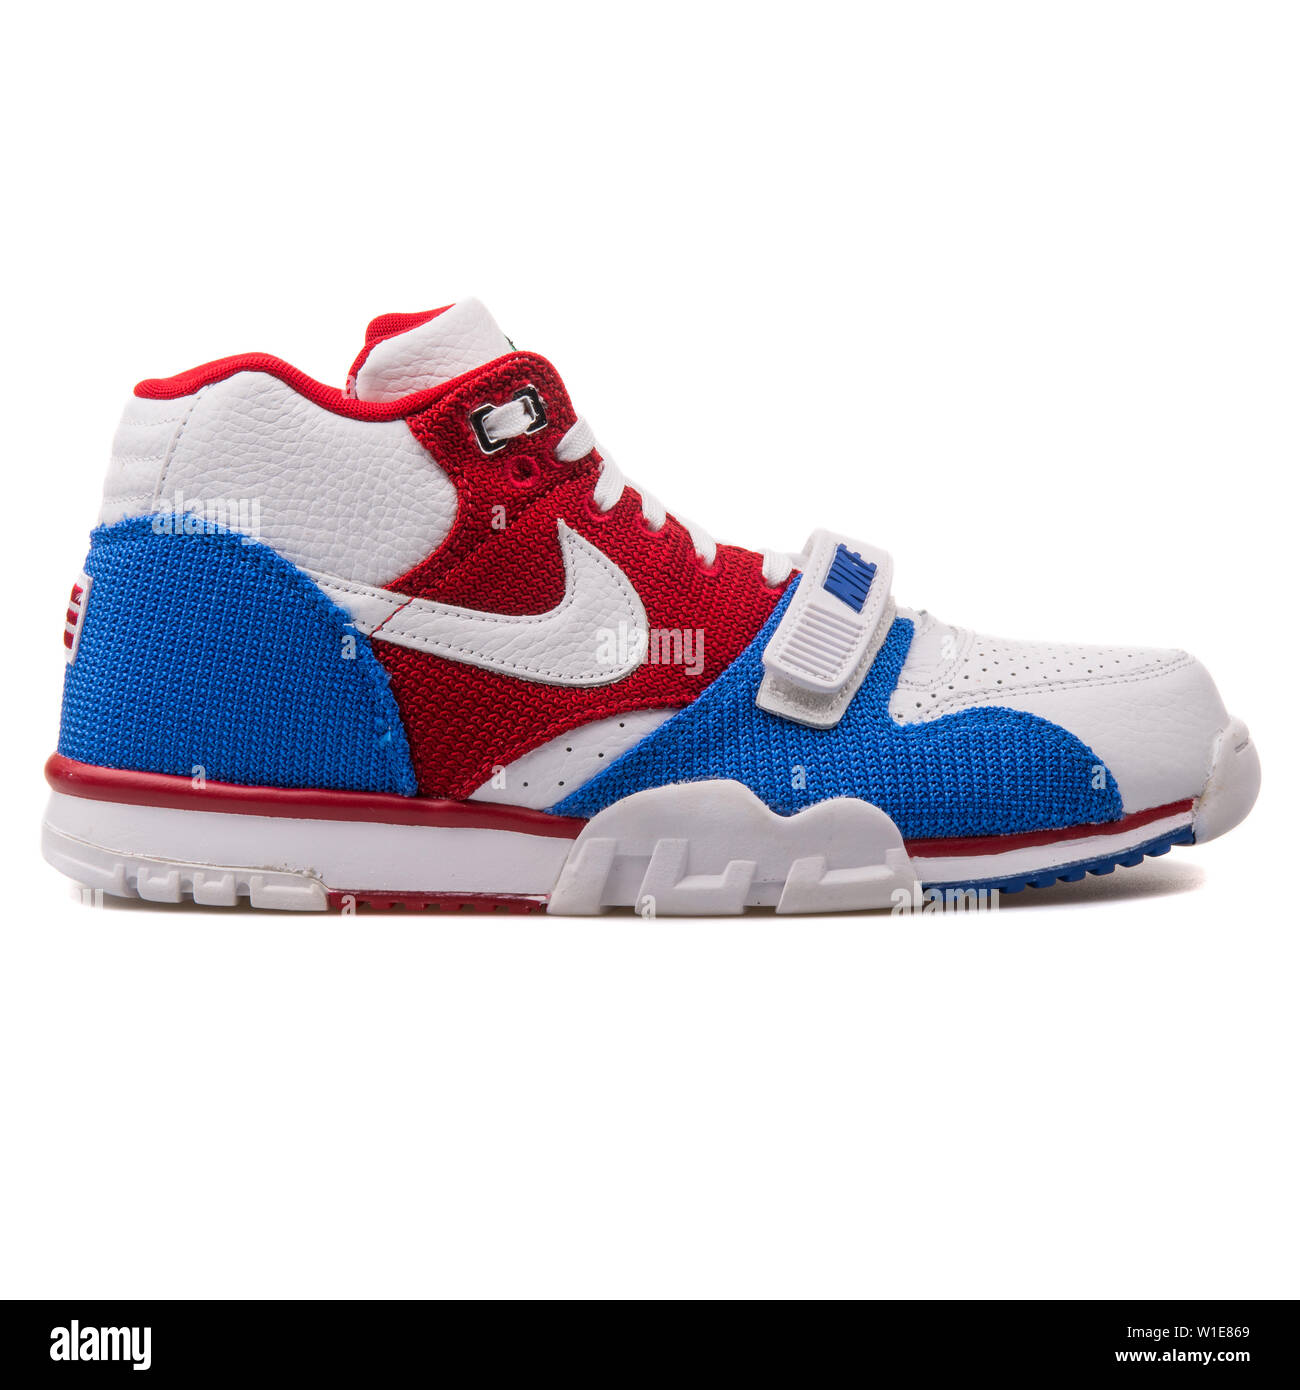 VIENNA, AUSTRIA - AUGUST 25, 2017: Nike Air Trainer 1 Mid Premium QS white,  red and blue sneaker on white background Stock Photo - Alamy